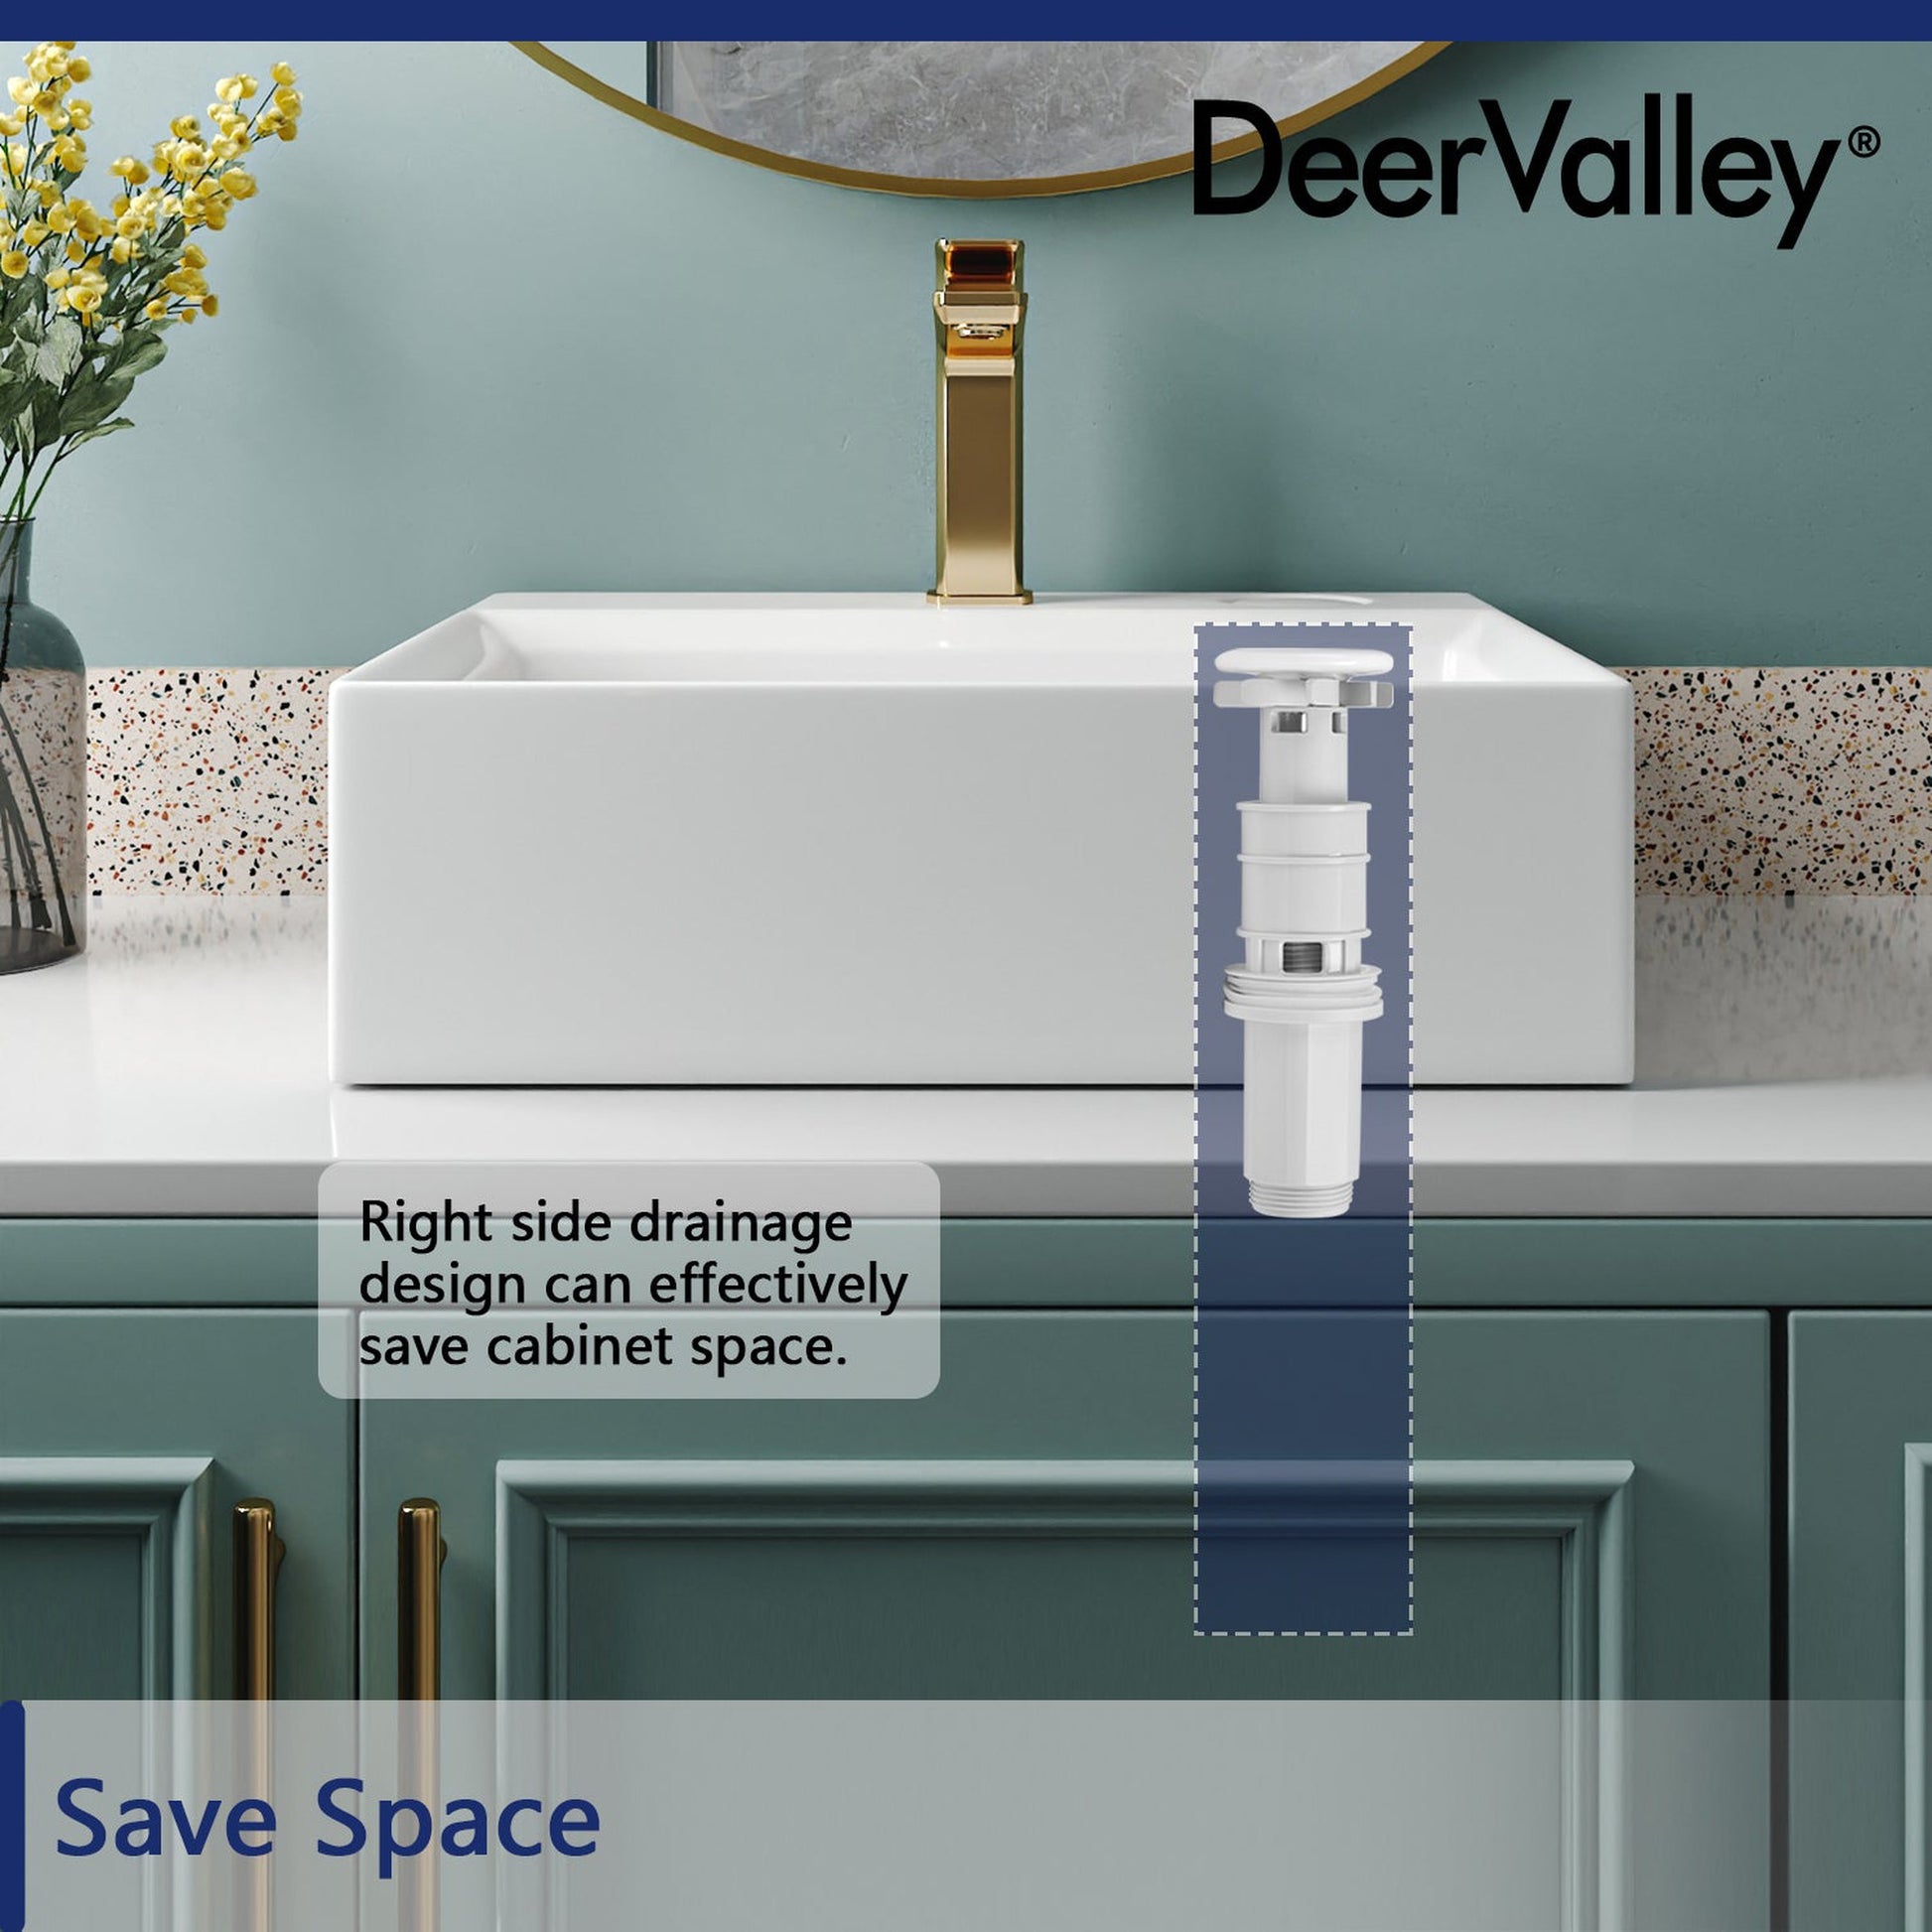 DeerValley White Pop-Up Bathroom Sink Drain (Fit with DV-1V0064)